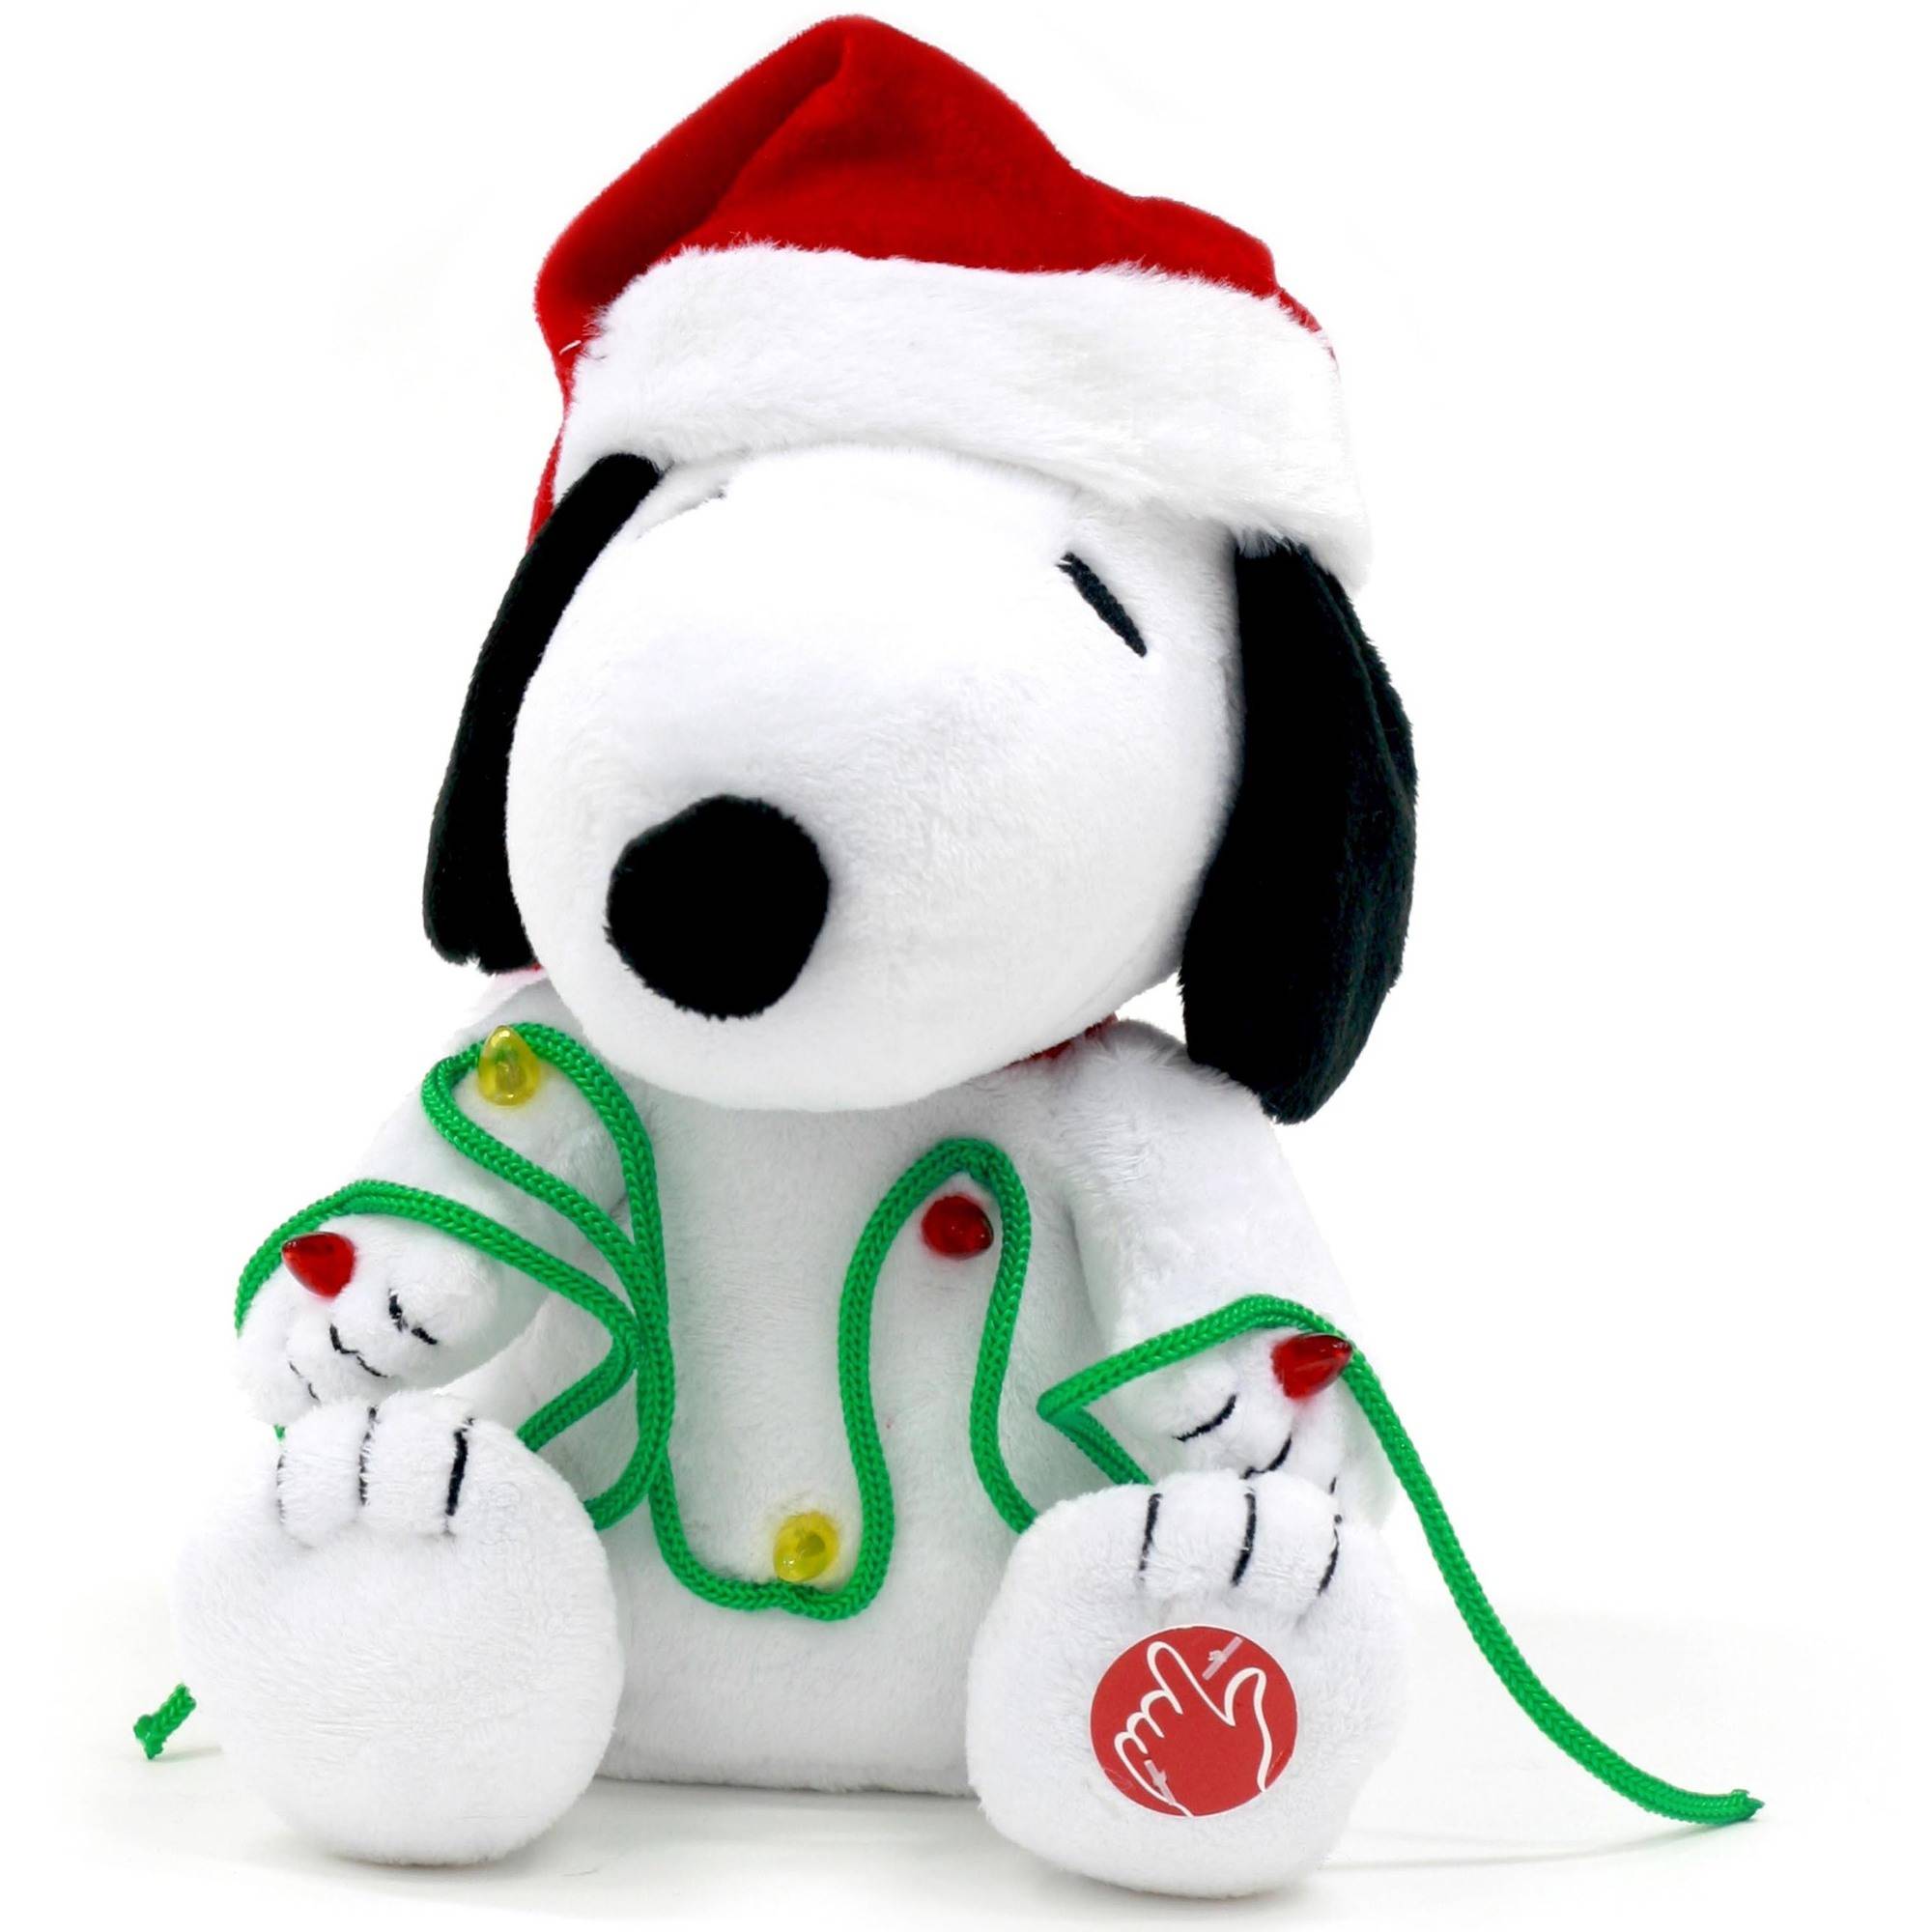 Snoopy w/ holiday lights was made by Dan Dee in 2017, and is based on the P...